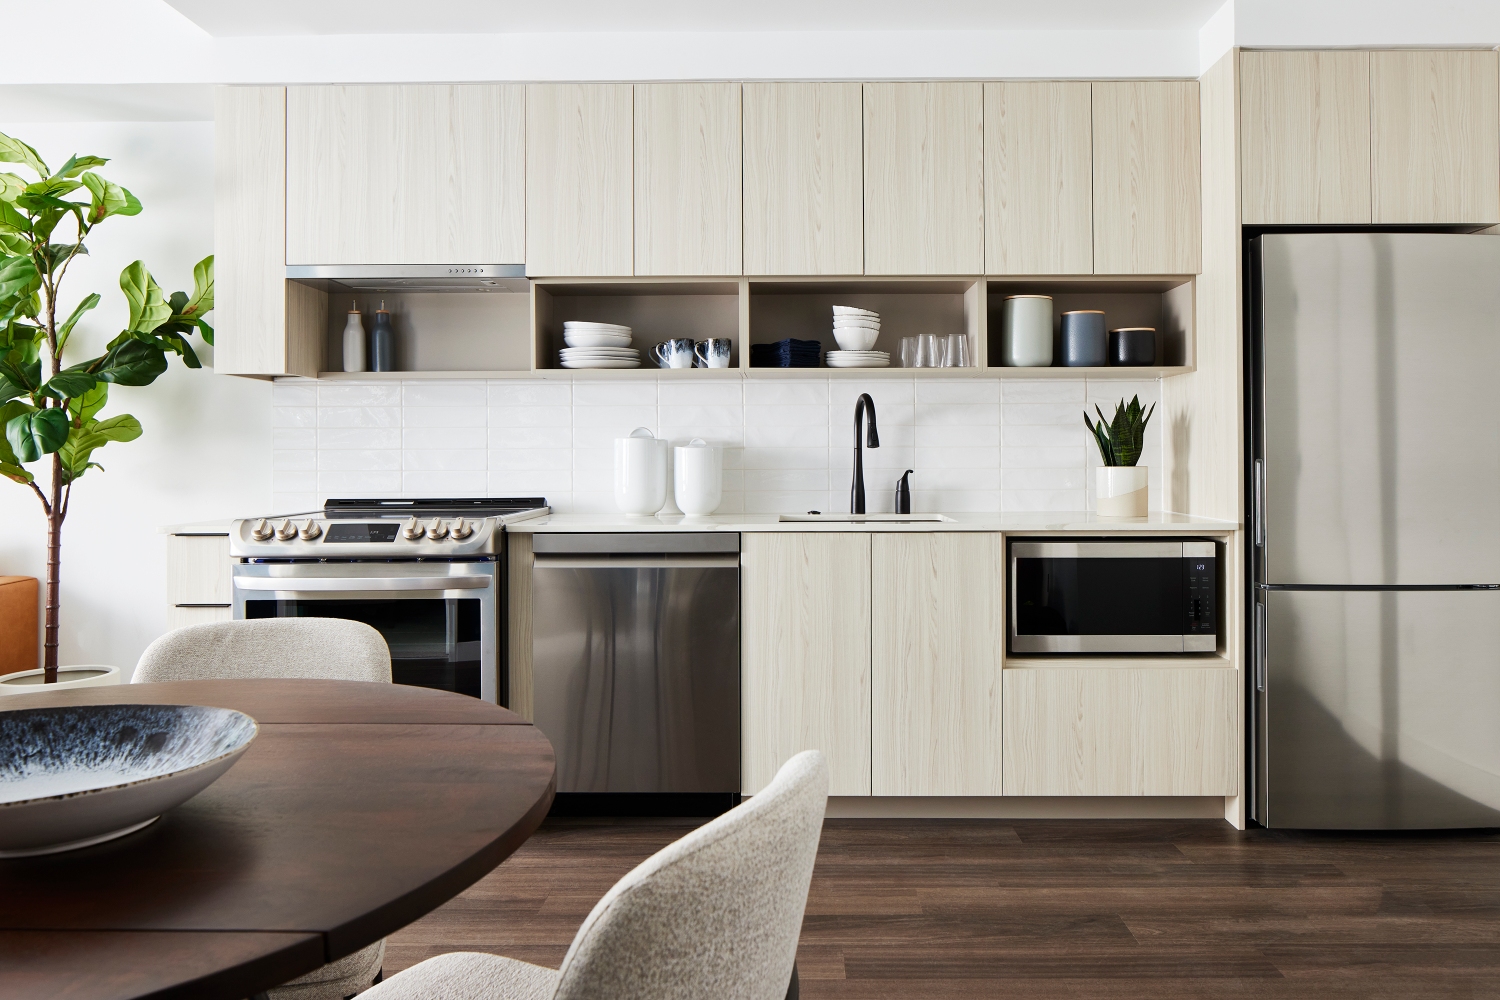 The Tides : Chef-inspired kitchens welcome your culinary imagination.